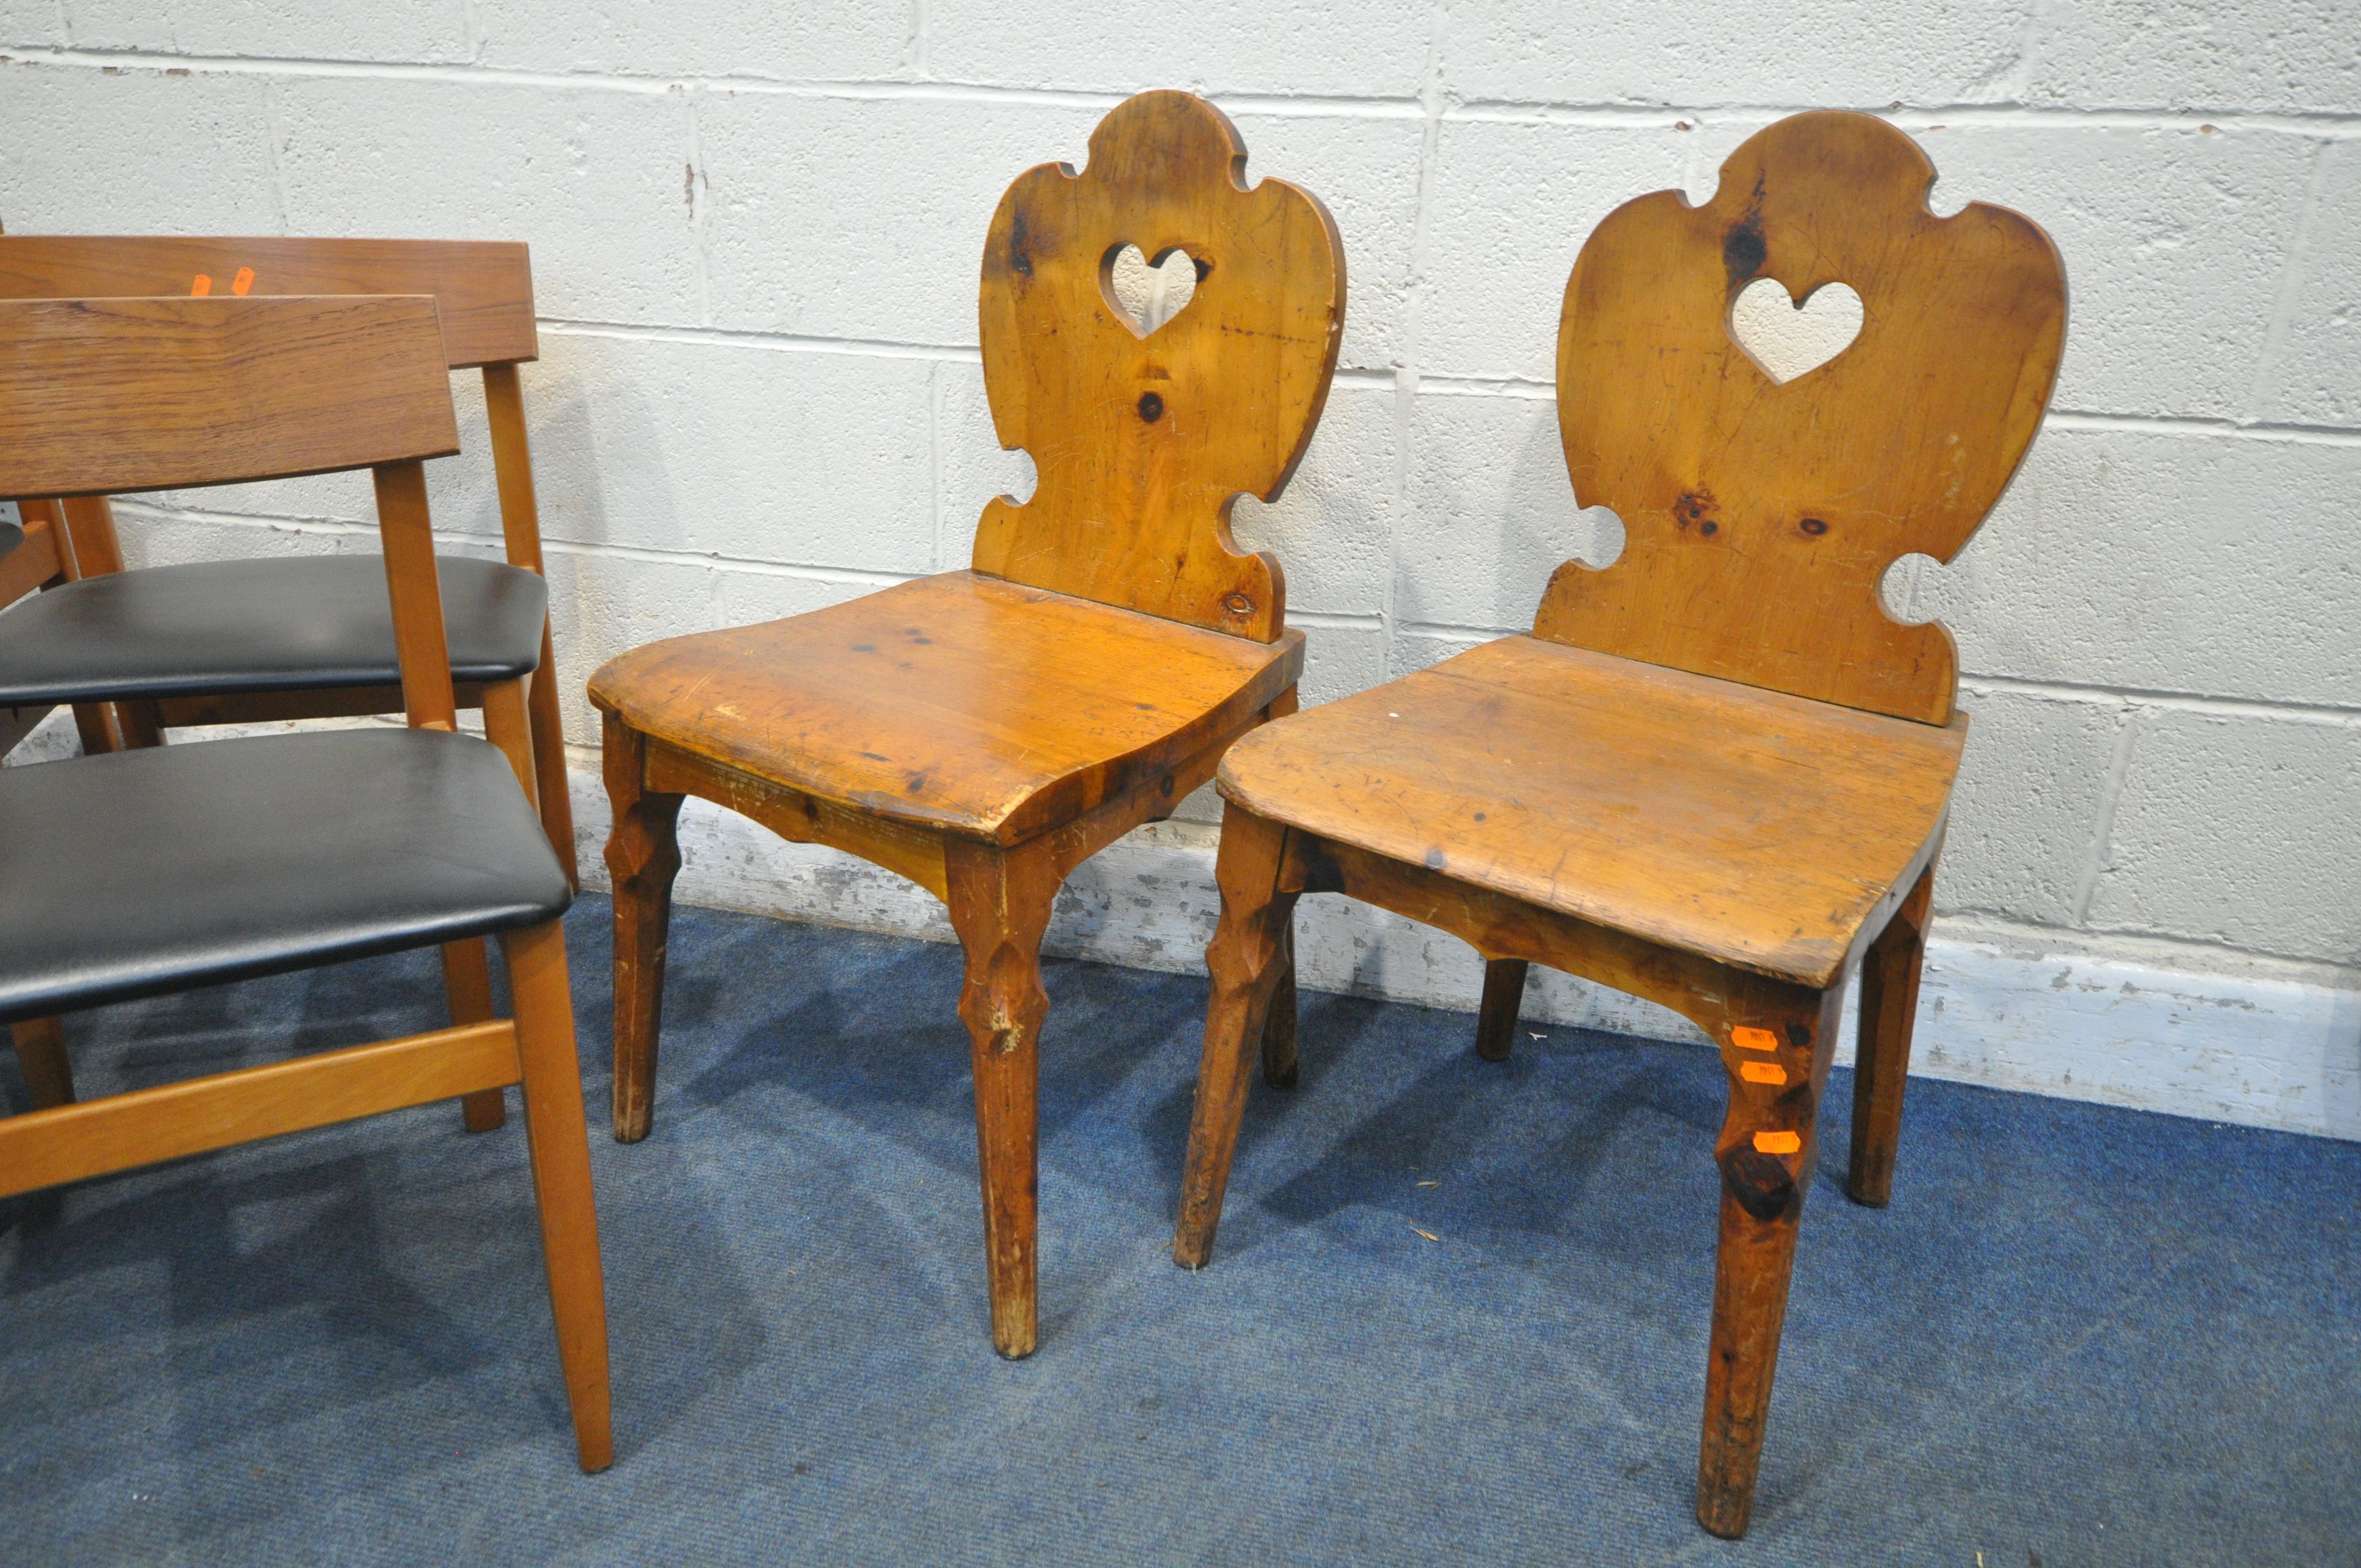 A SELECTION OF CHAIRS, to include a pair of pine hall chairs, a set of four mid-century teak chairs, - Image 2 of 6